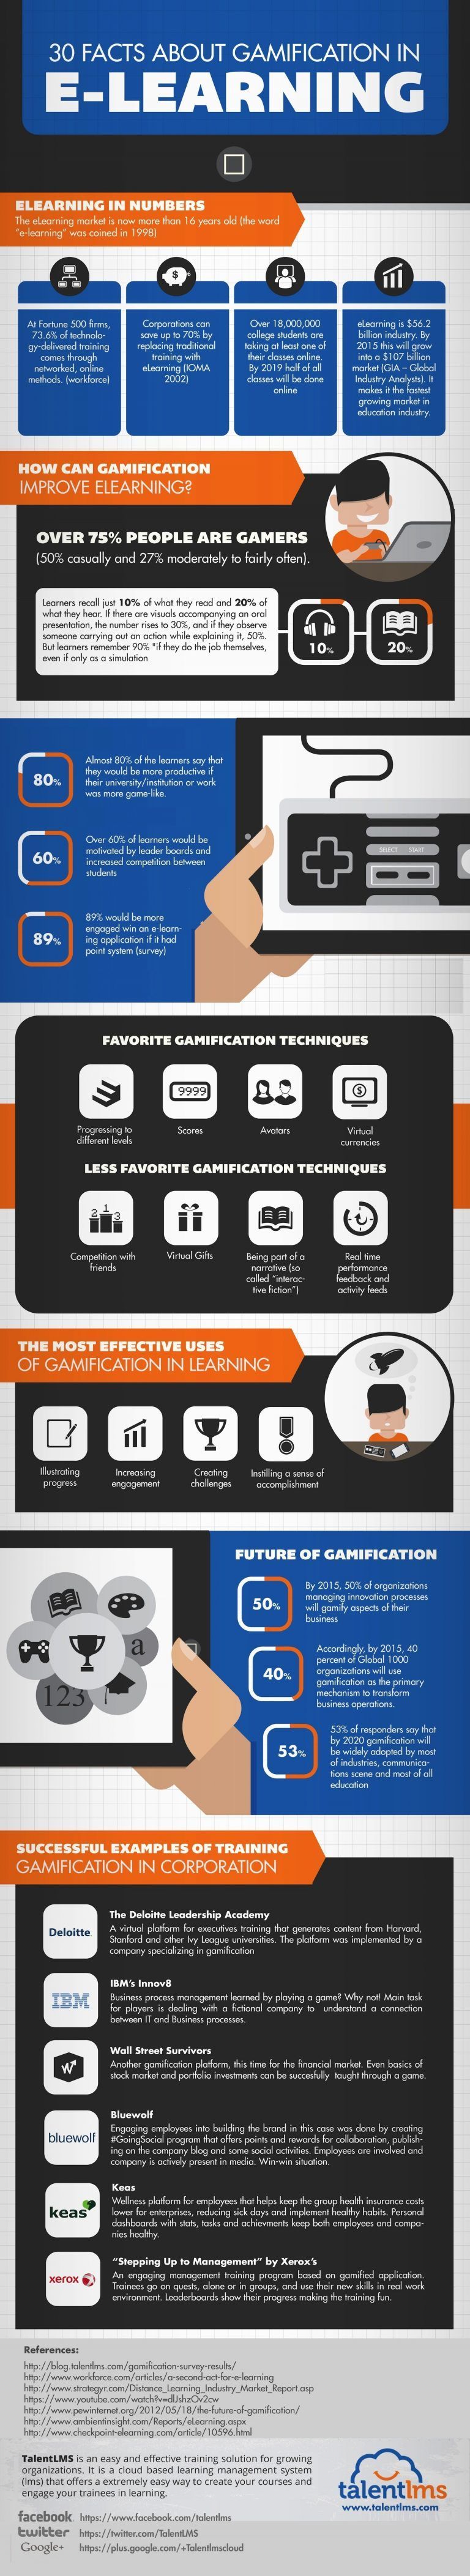 30 Facts About Gamification in eLearning Infographic